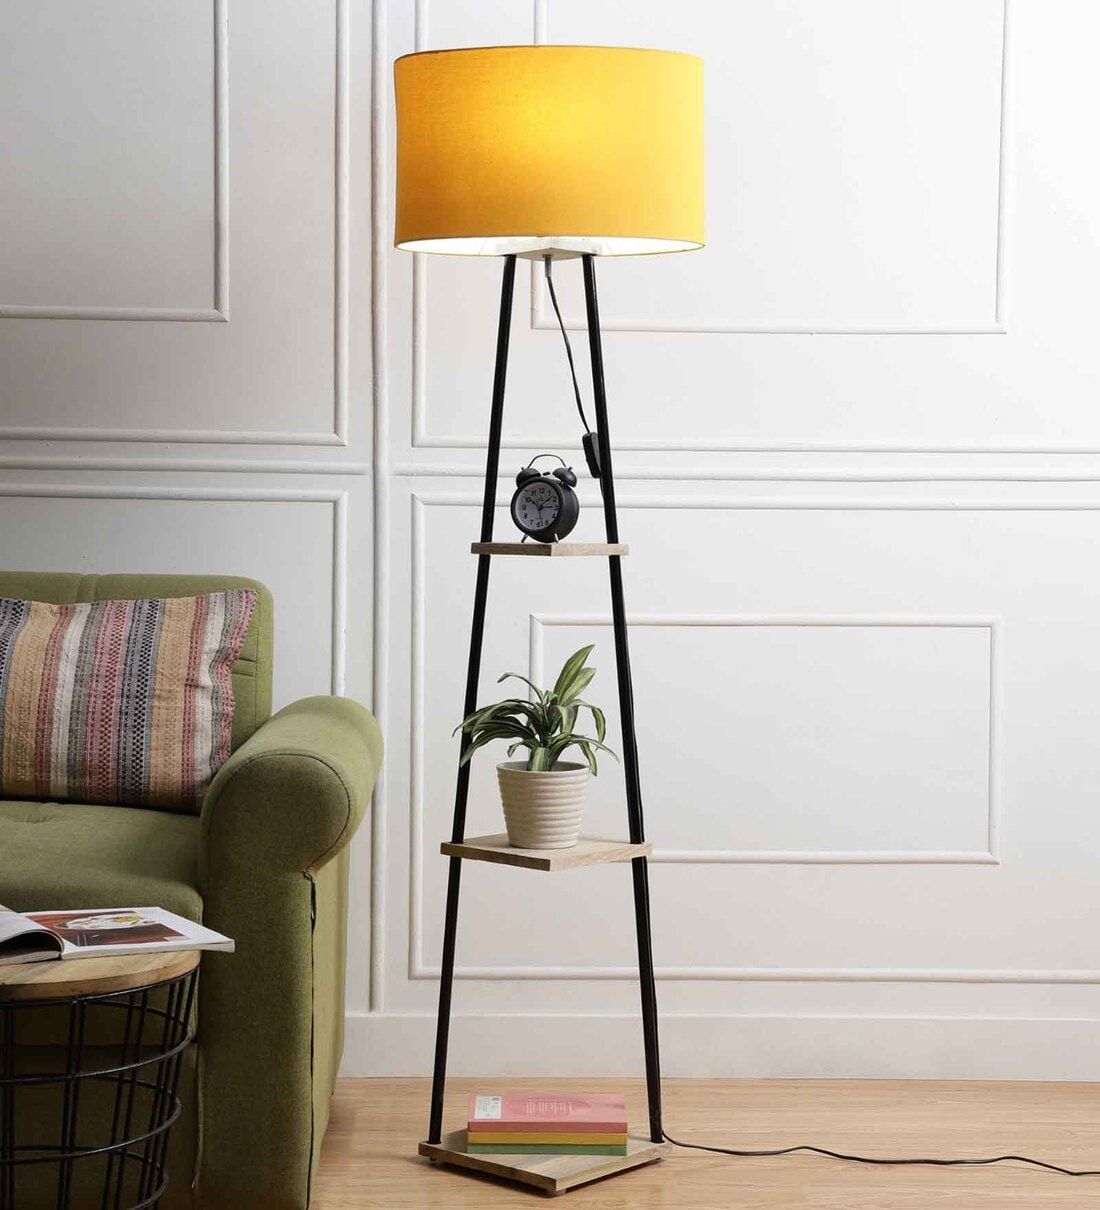 Buy Yellow Midwest Fabric Shade 3 Tier Shelf Storage Floor Lamp With Metal  Basesanded Edge Online – Shelf Floor Lamps – Lamps – Lamps And Lighting  – Pepperfry Product In 3 Tier Floor Lamps (View 3 of 15)